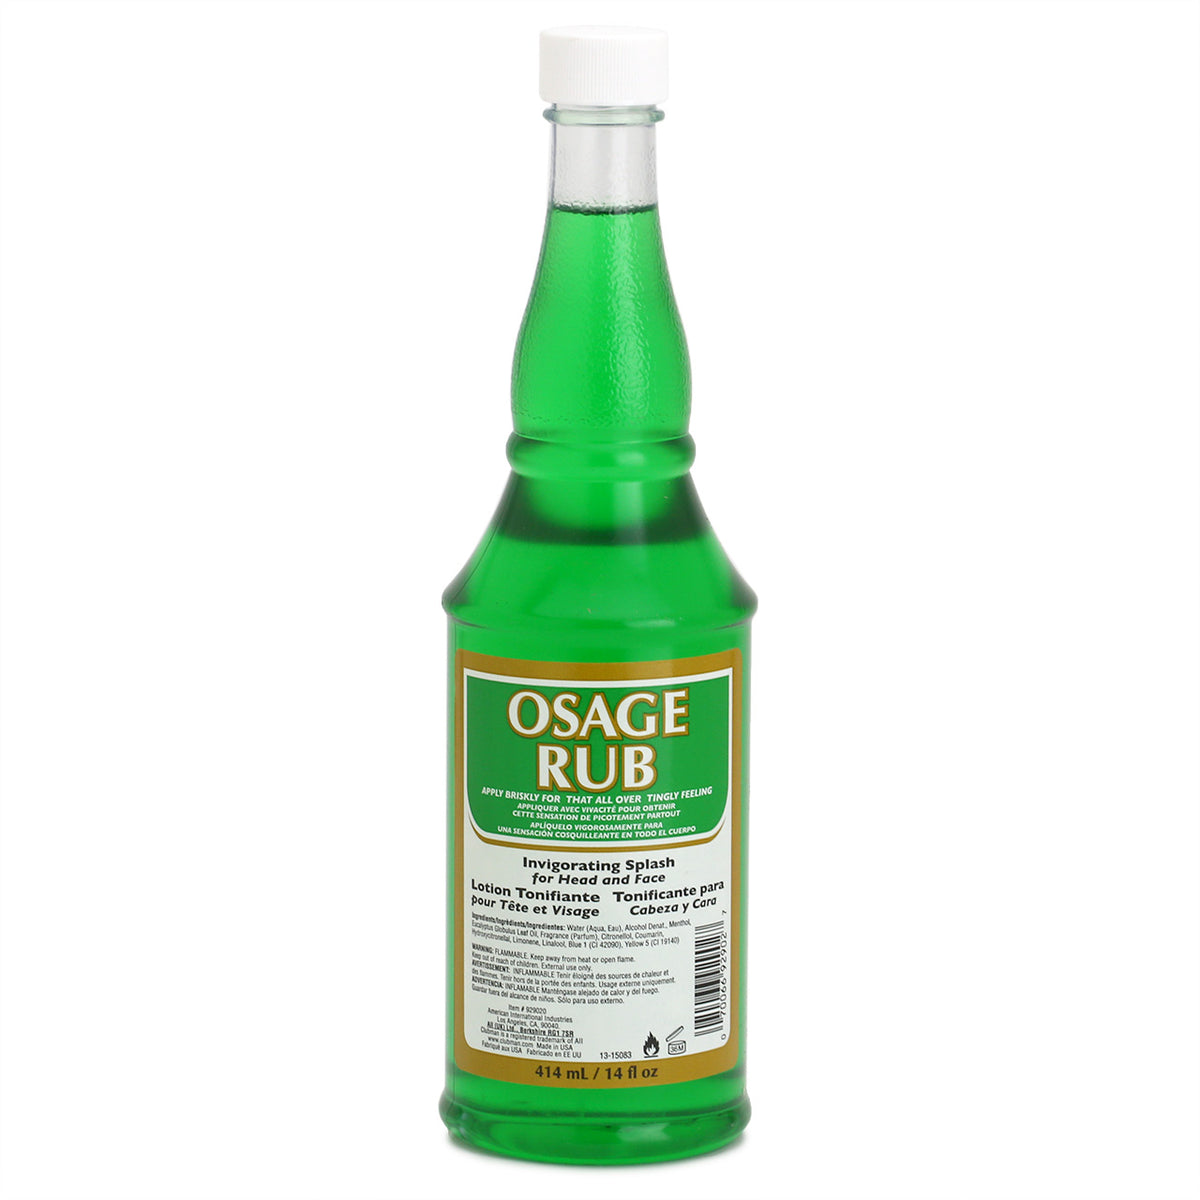 Osage Rub is a Green liquid in a tall bottle ready to splash 